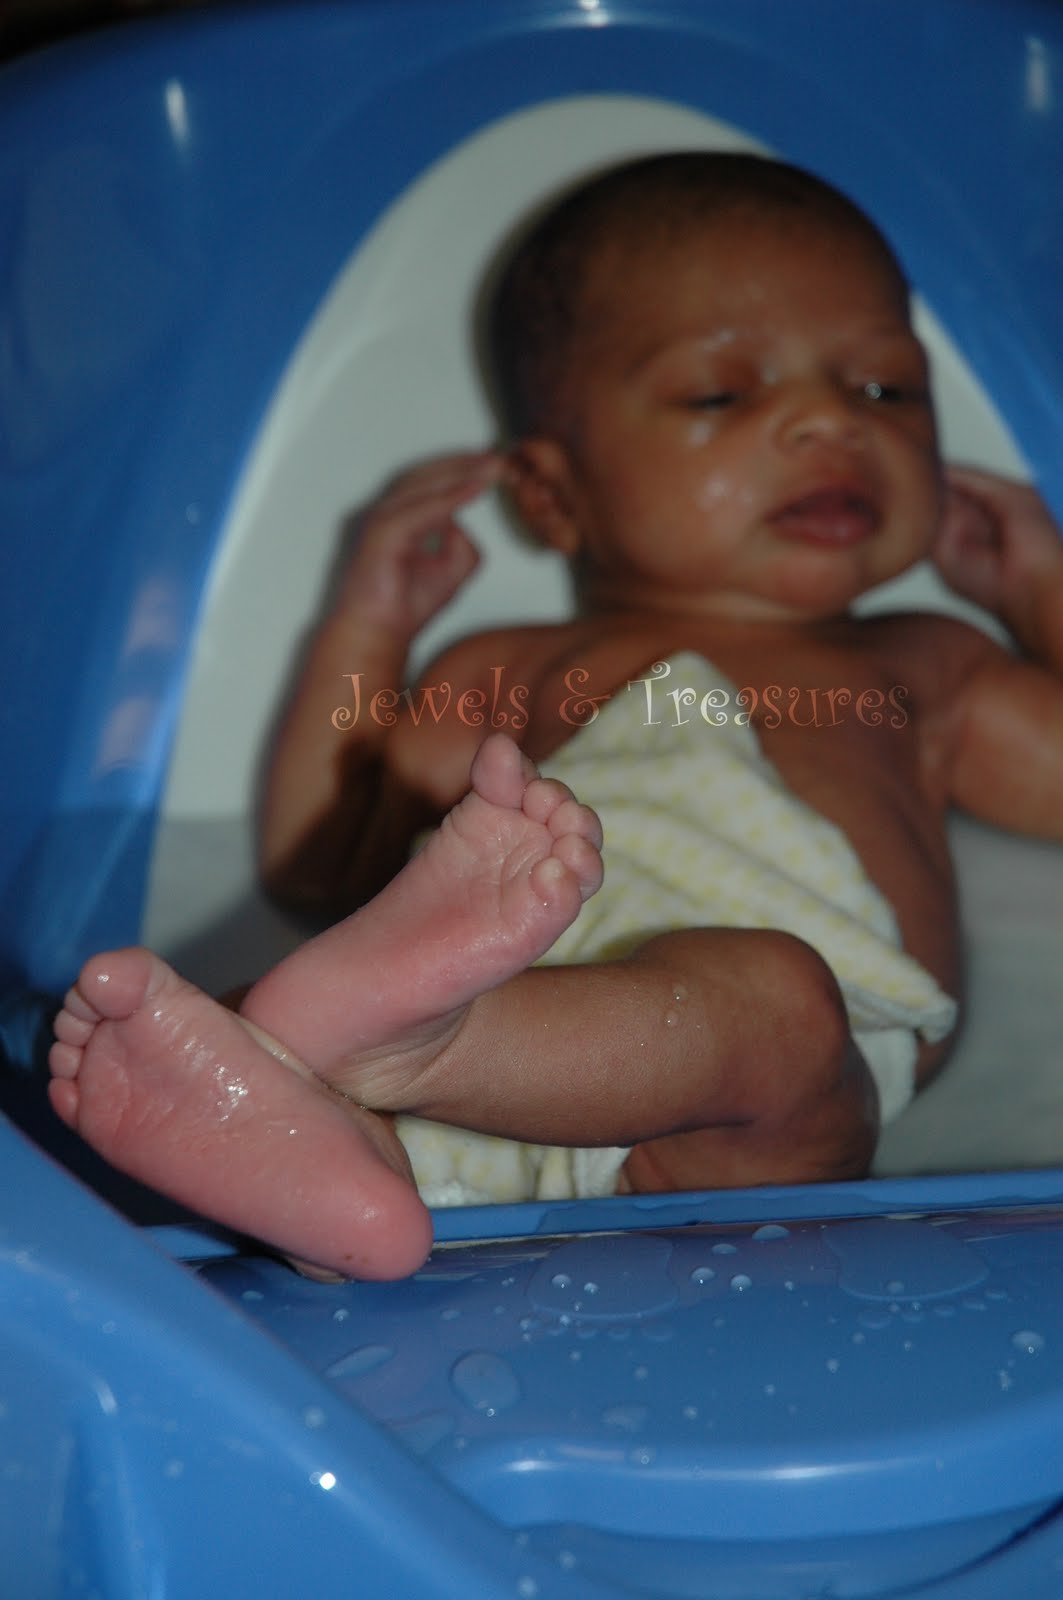 Jewels & Treasures: 4moms Cleanwater Infant Tub Review ...